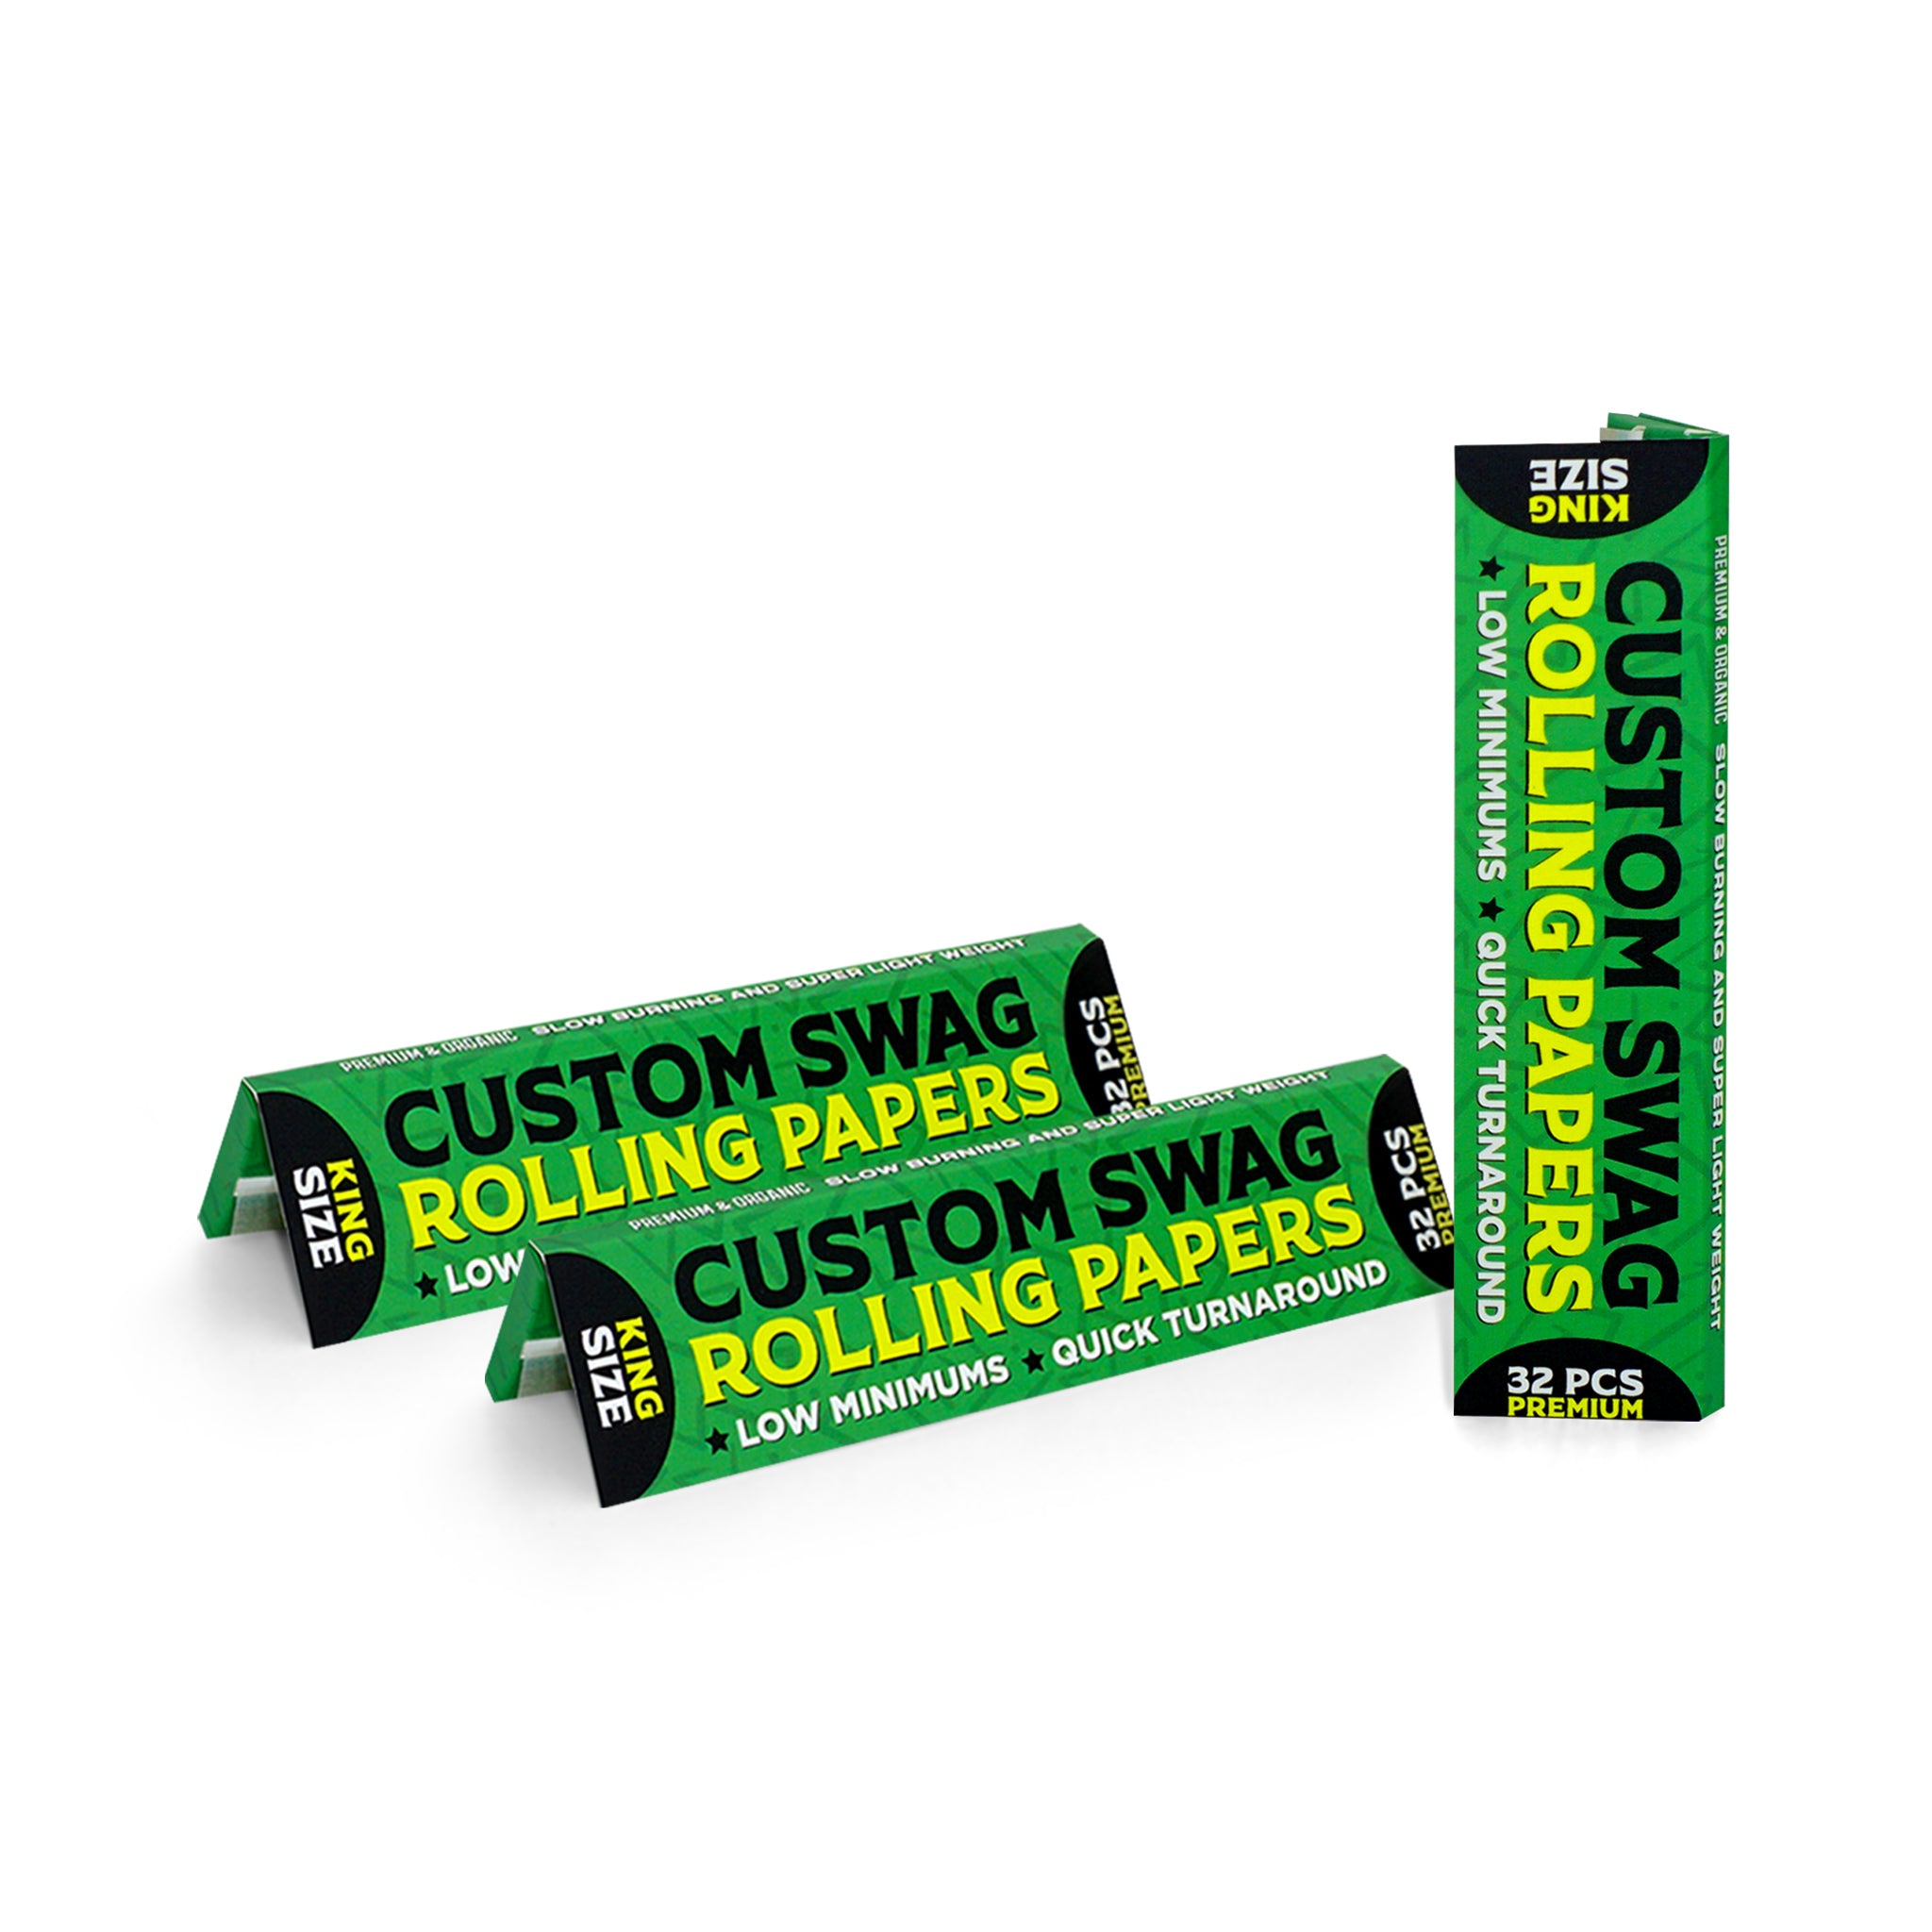 LOW MINIMUM Custom Rolling Paper Booklets For SWAG!